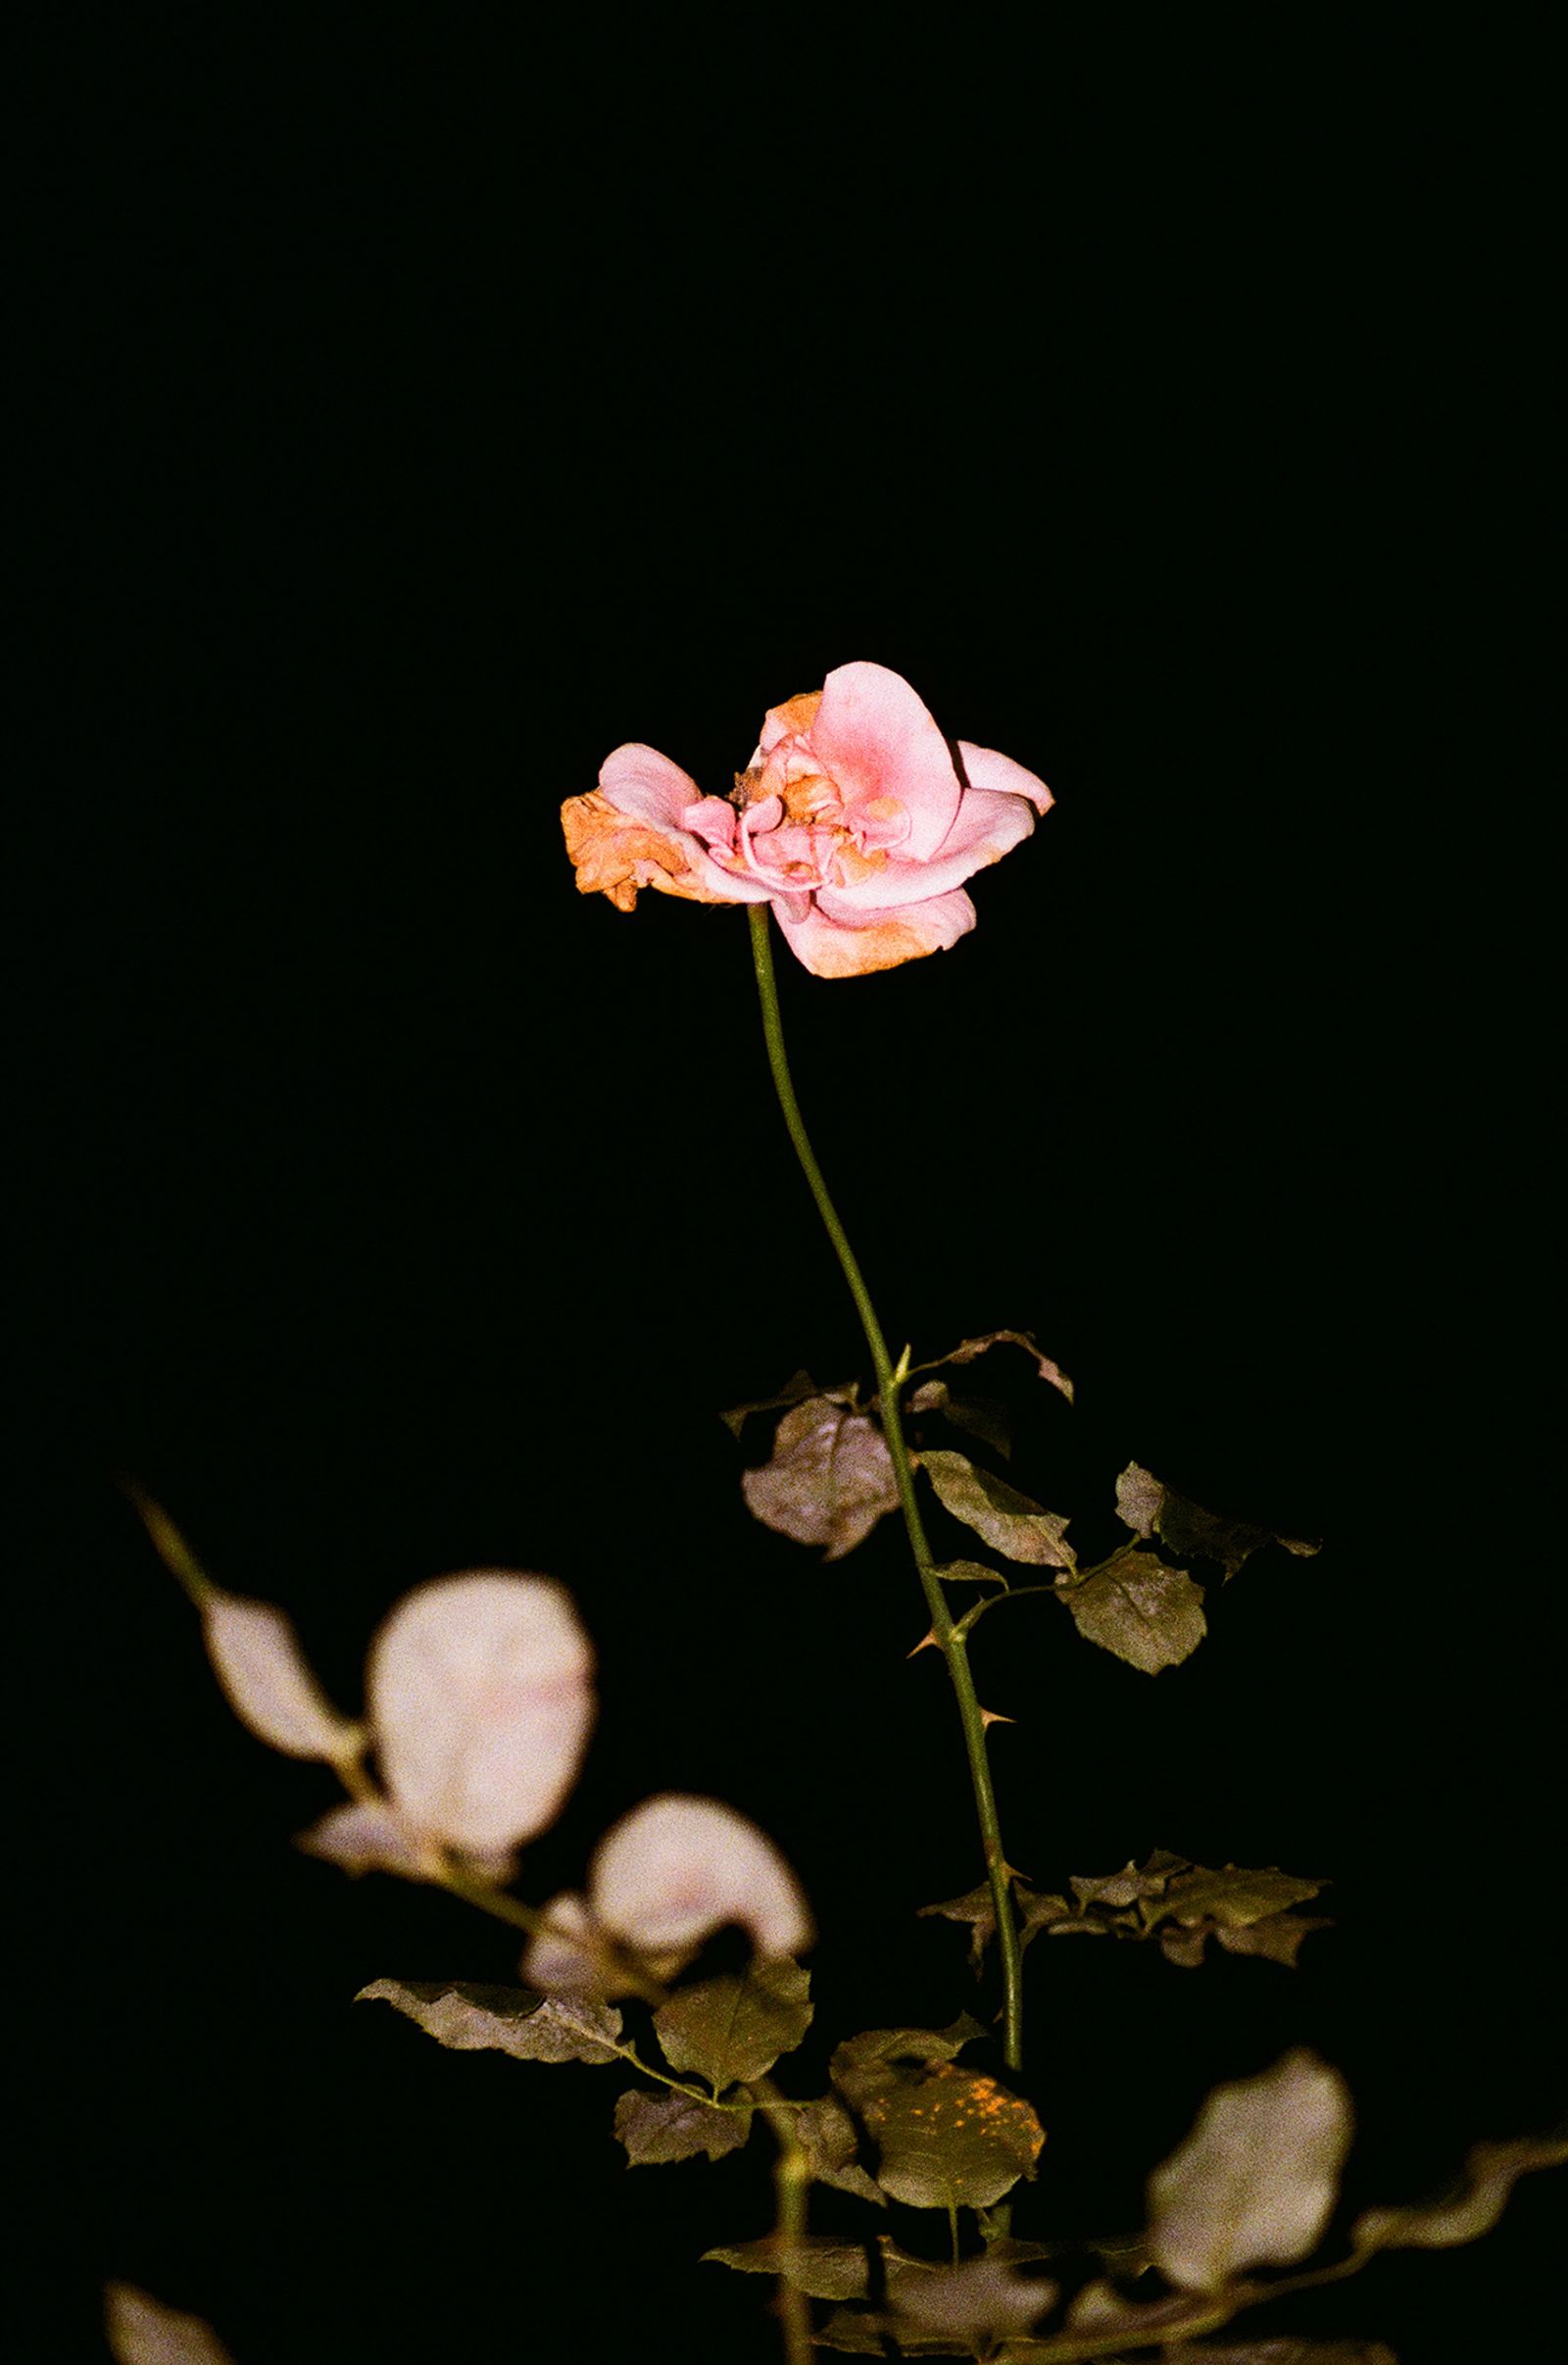 © Logan  White - Image from the Another Day, Another Rose Garden photography project